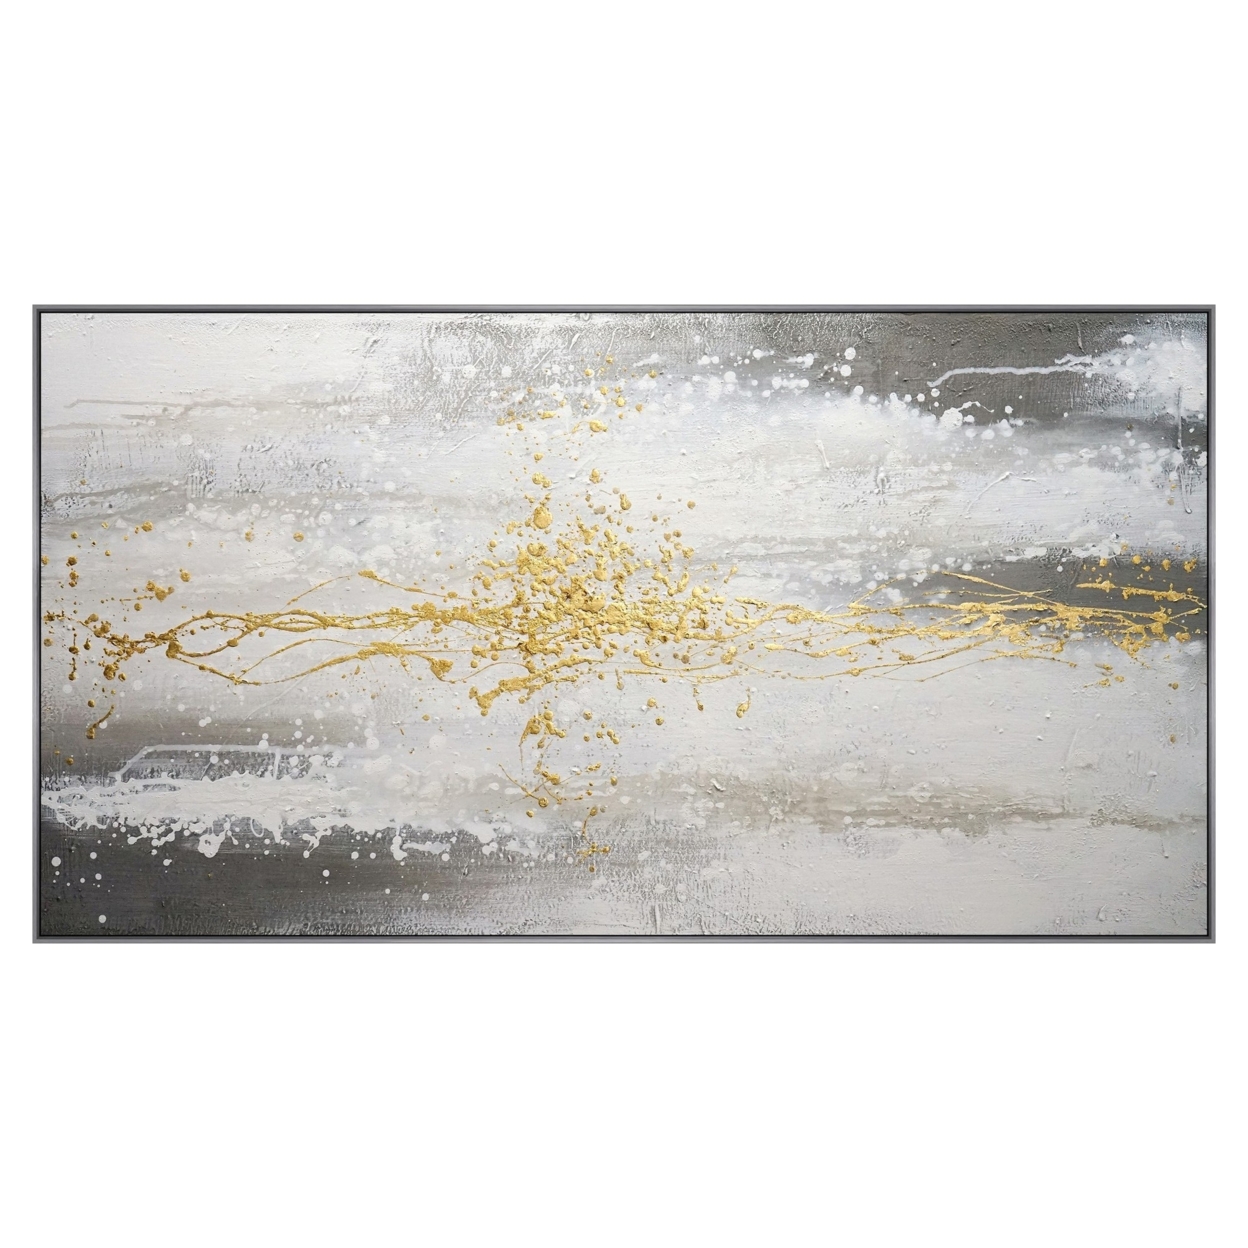 32 X 59 Hand Painted Abstract Painting, Framed, Black, White With Gold Foil- Saltoro Sherpi